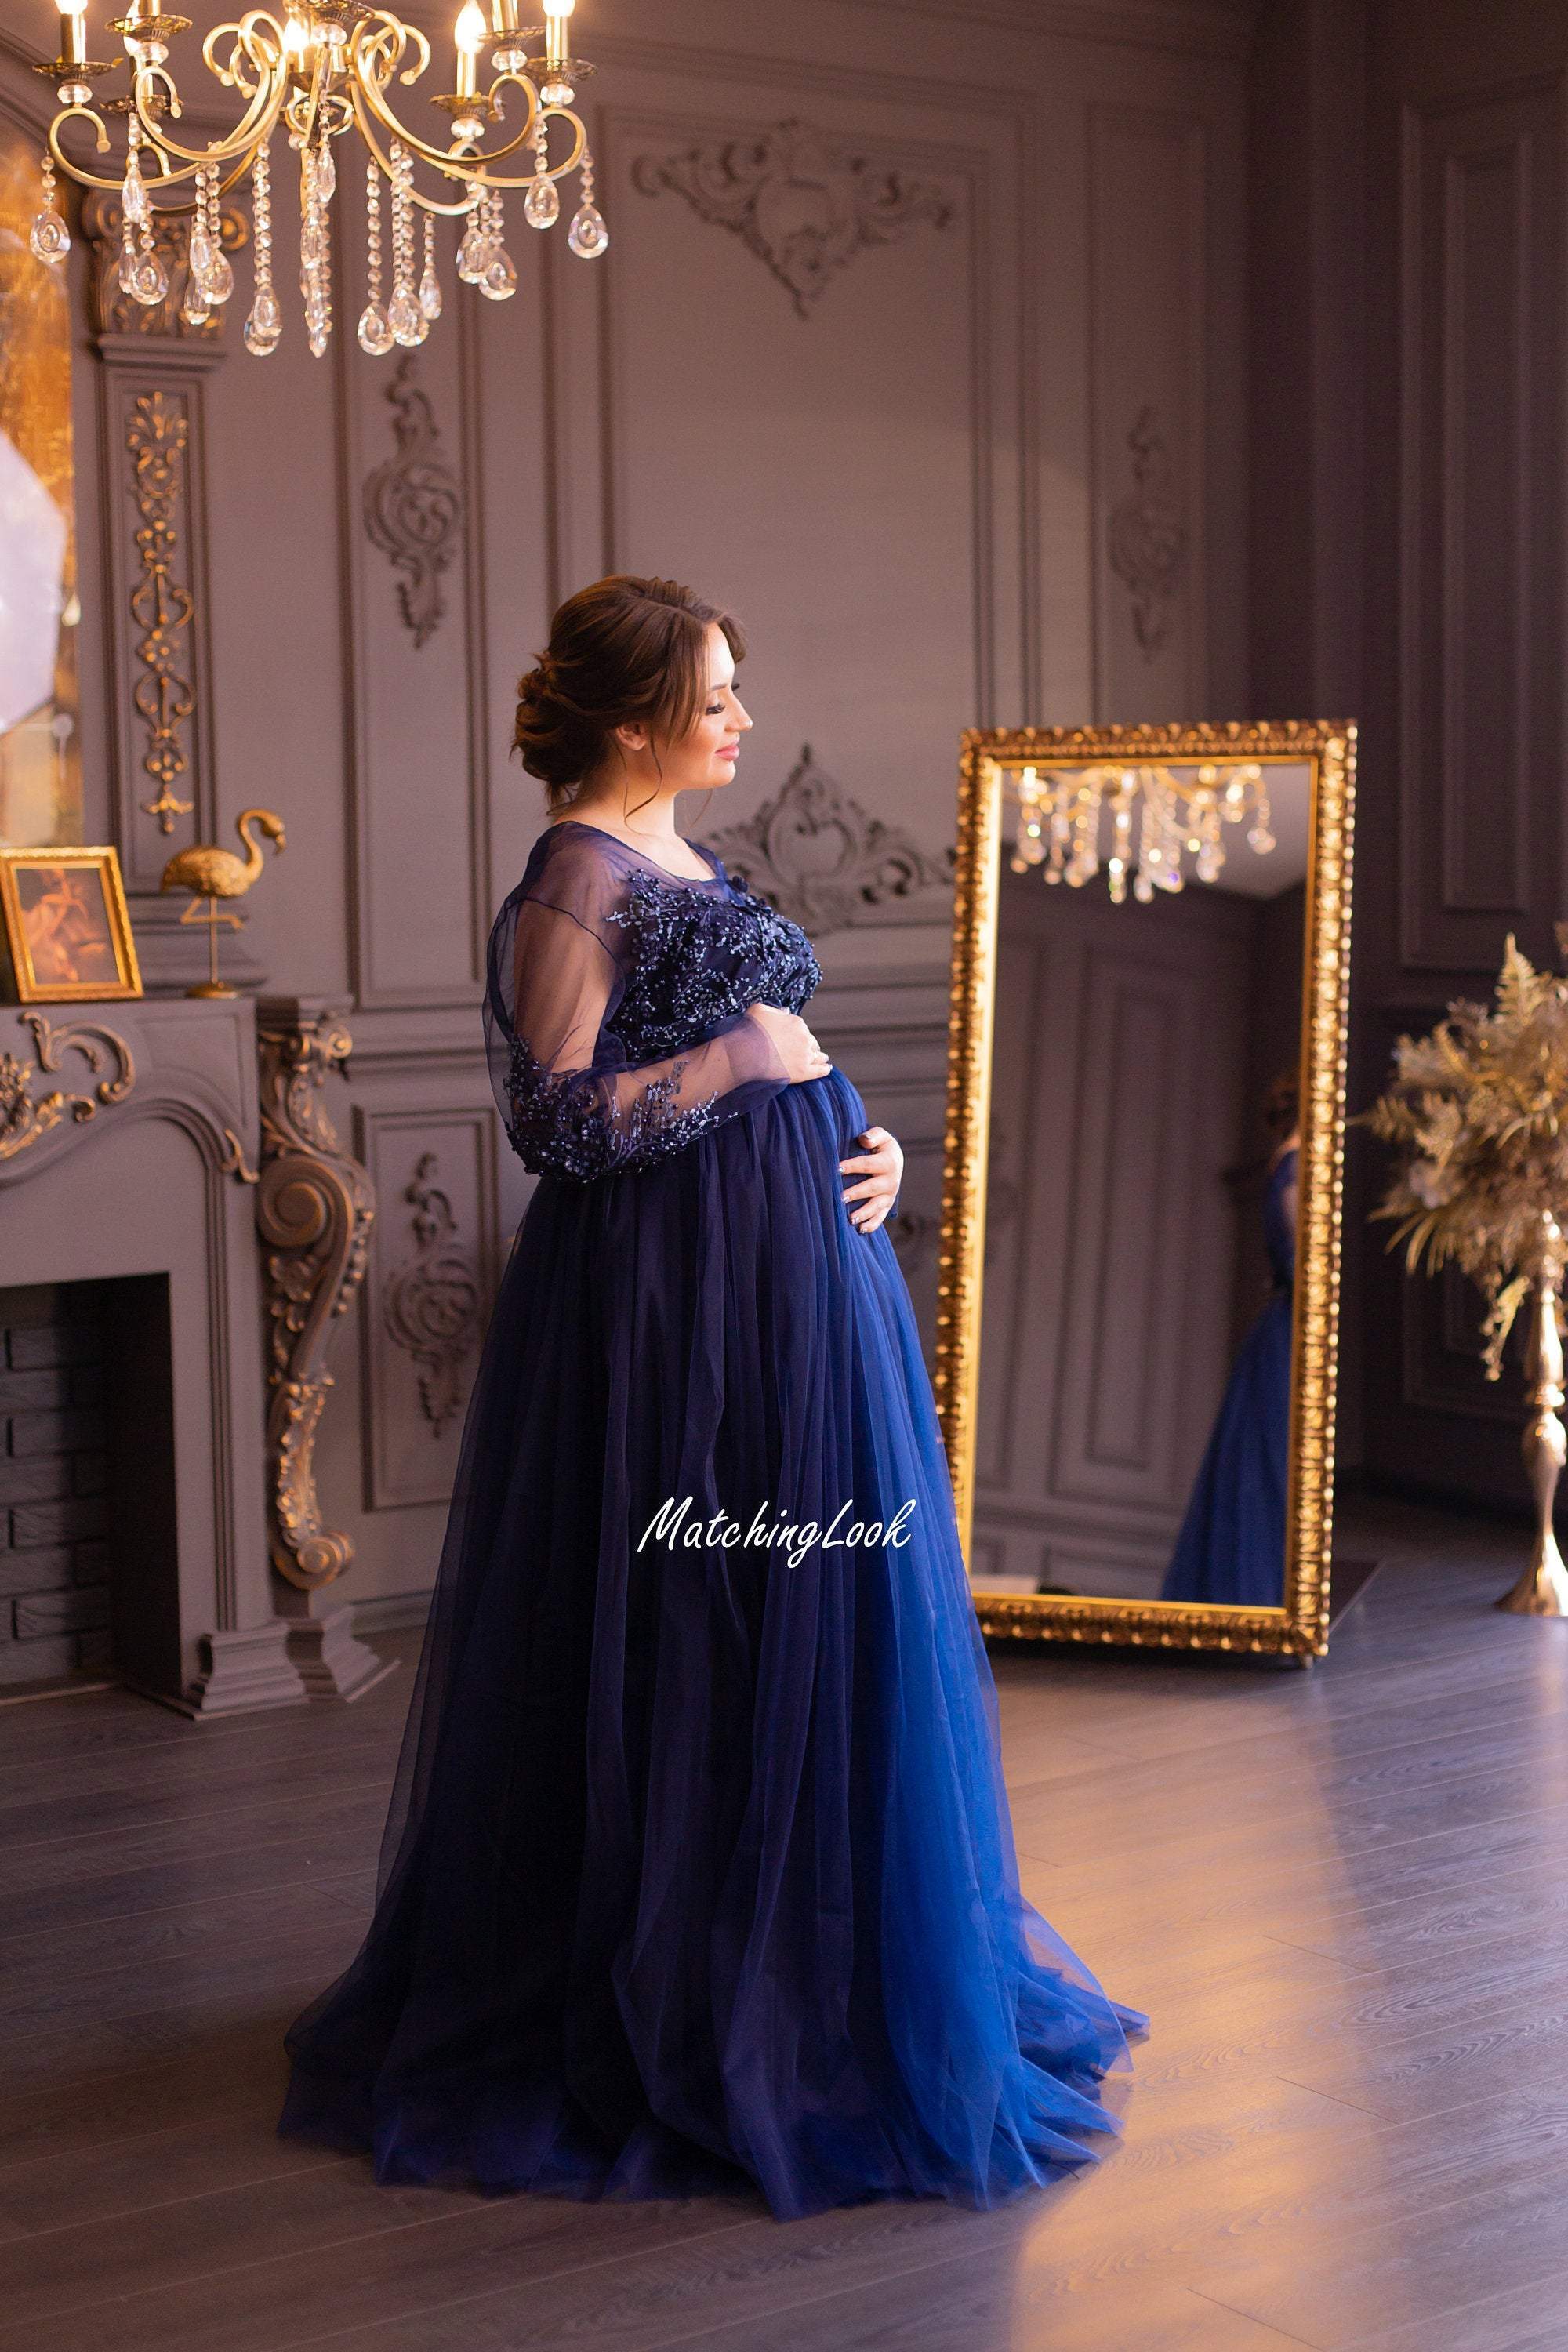 Chic Chiffon Maternity Maxi Dress With Split, V Neck And Open Front Perfect  For Pregnancy Photography And Occasion Special Y0924 From Nickyoung06,  $19.74 | DHgate.Com